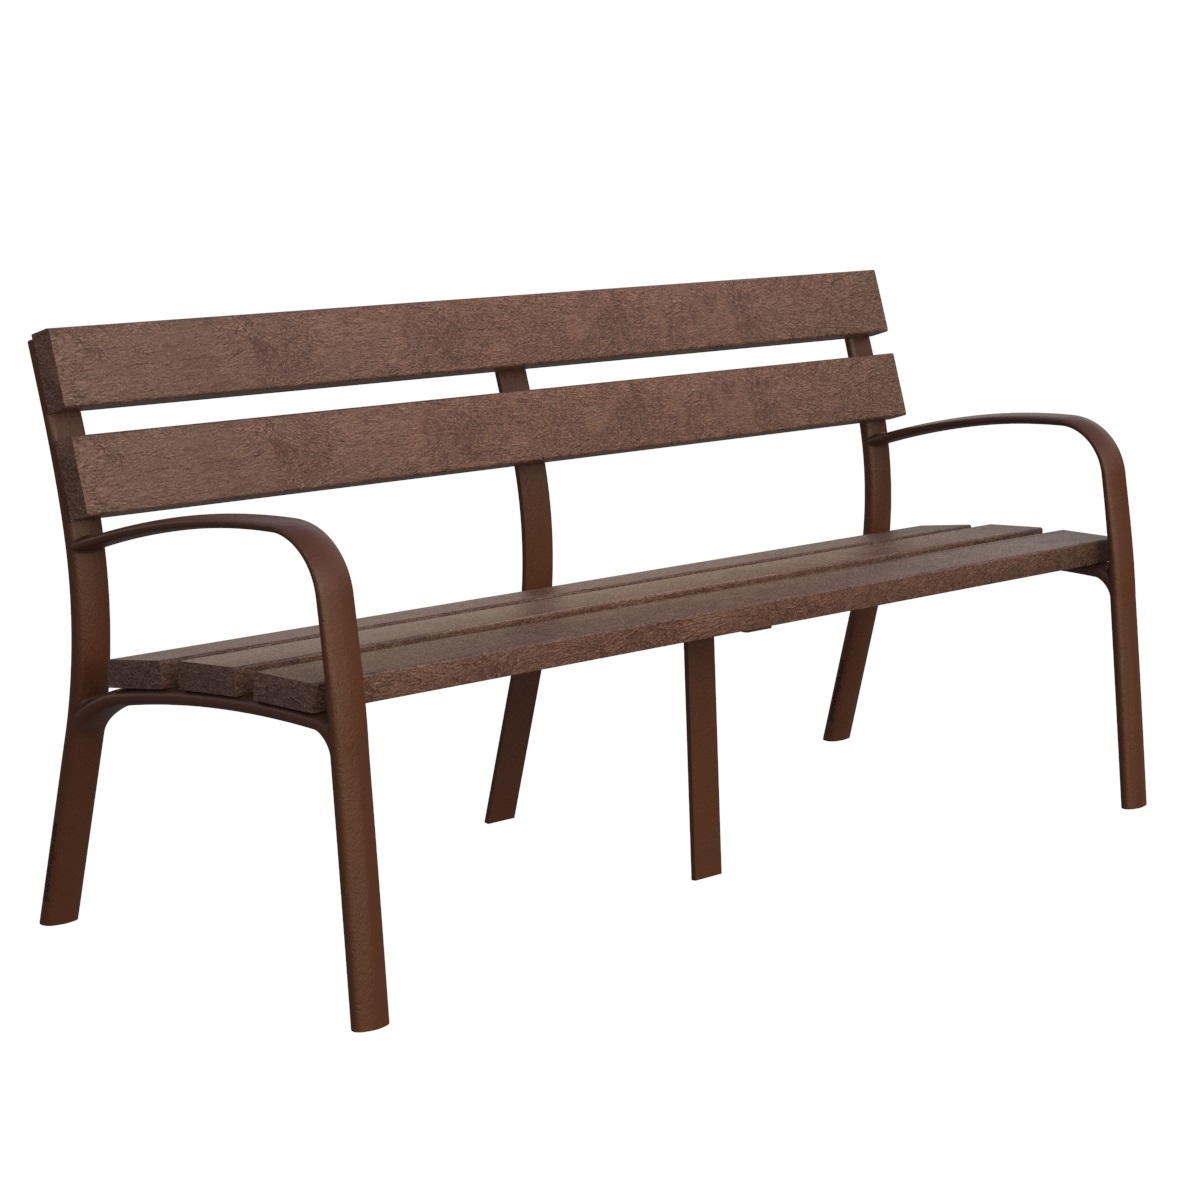 Recycled bench ECOCITY PRM